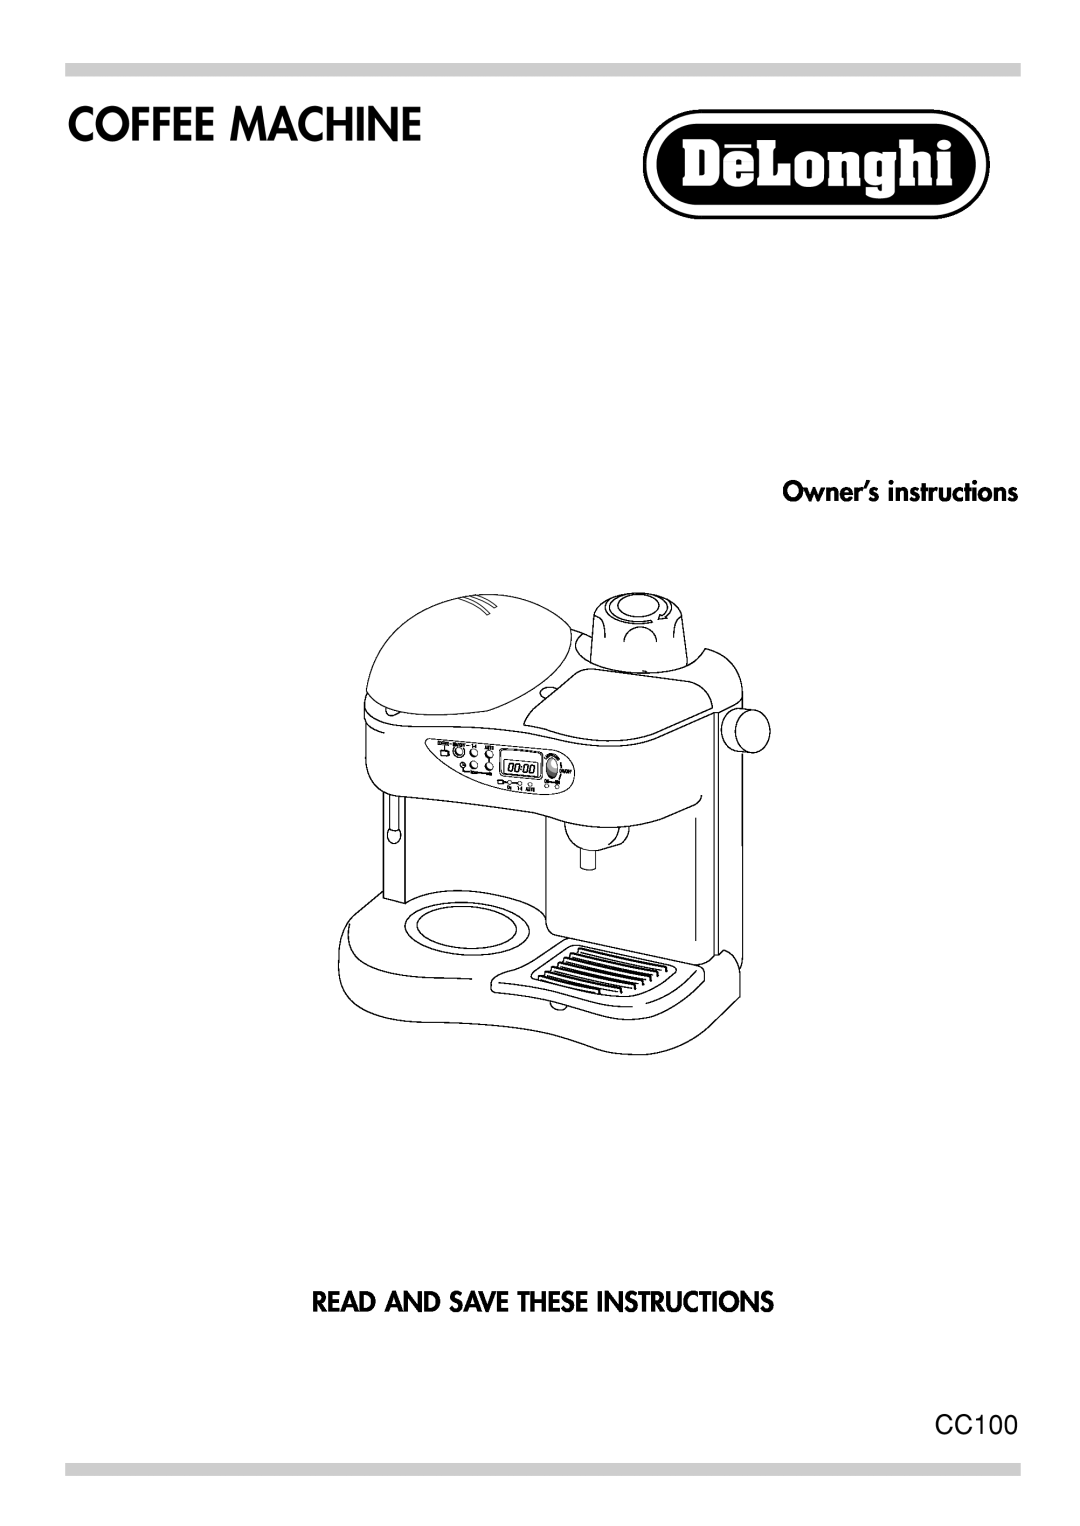 DeLonghi cc 100, CC100B manual Coffee Machine, Owner’s instructions, Read And Save These Instructions 